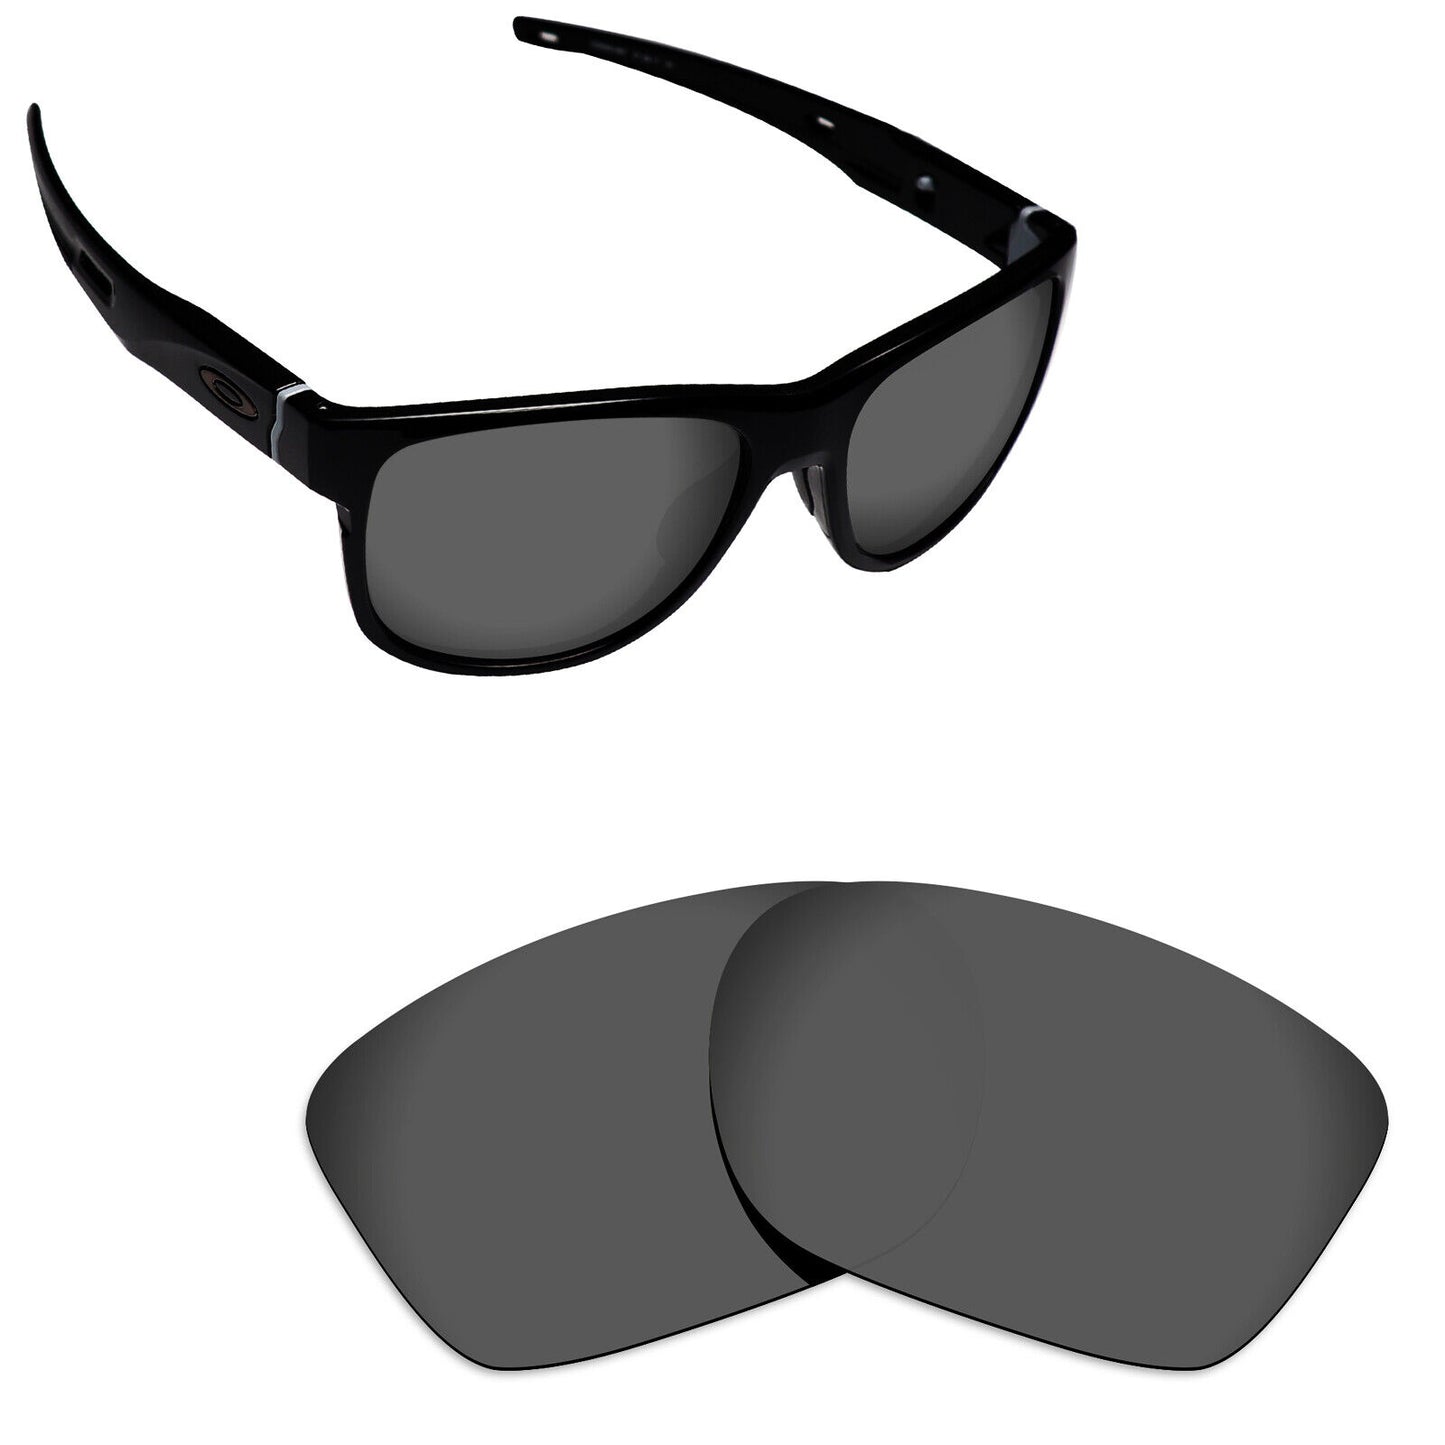 Hawkry Polarized Replacement Lens for-Oakley Crossrange Sunglass-Options